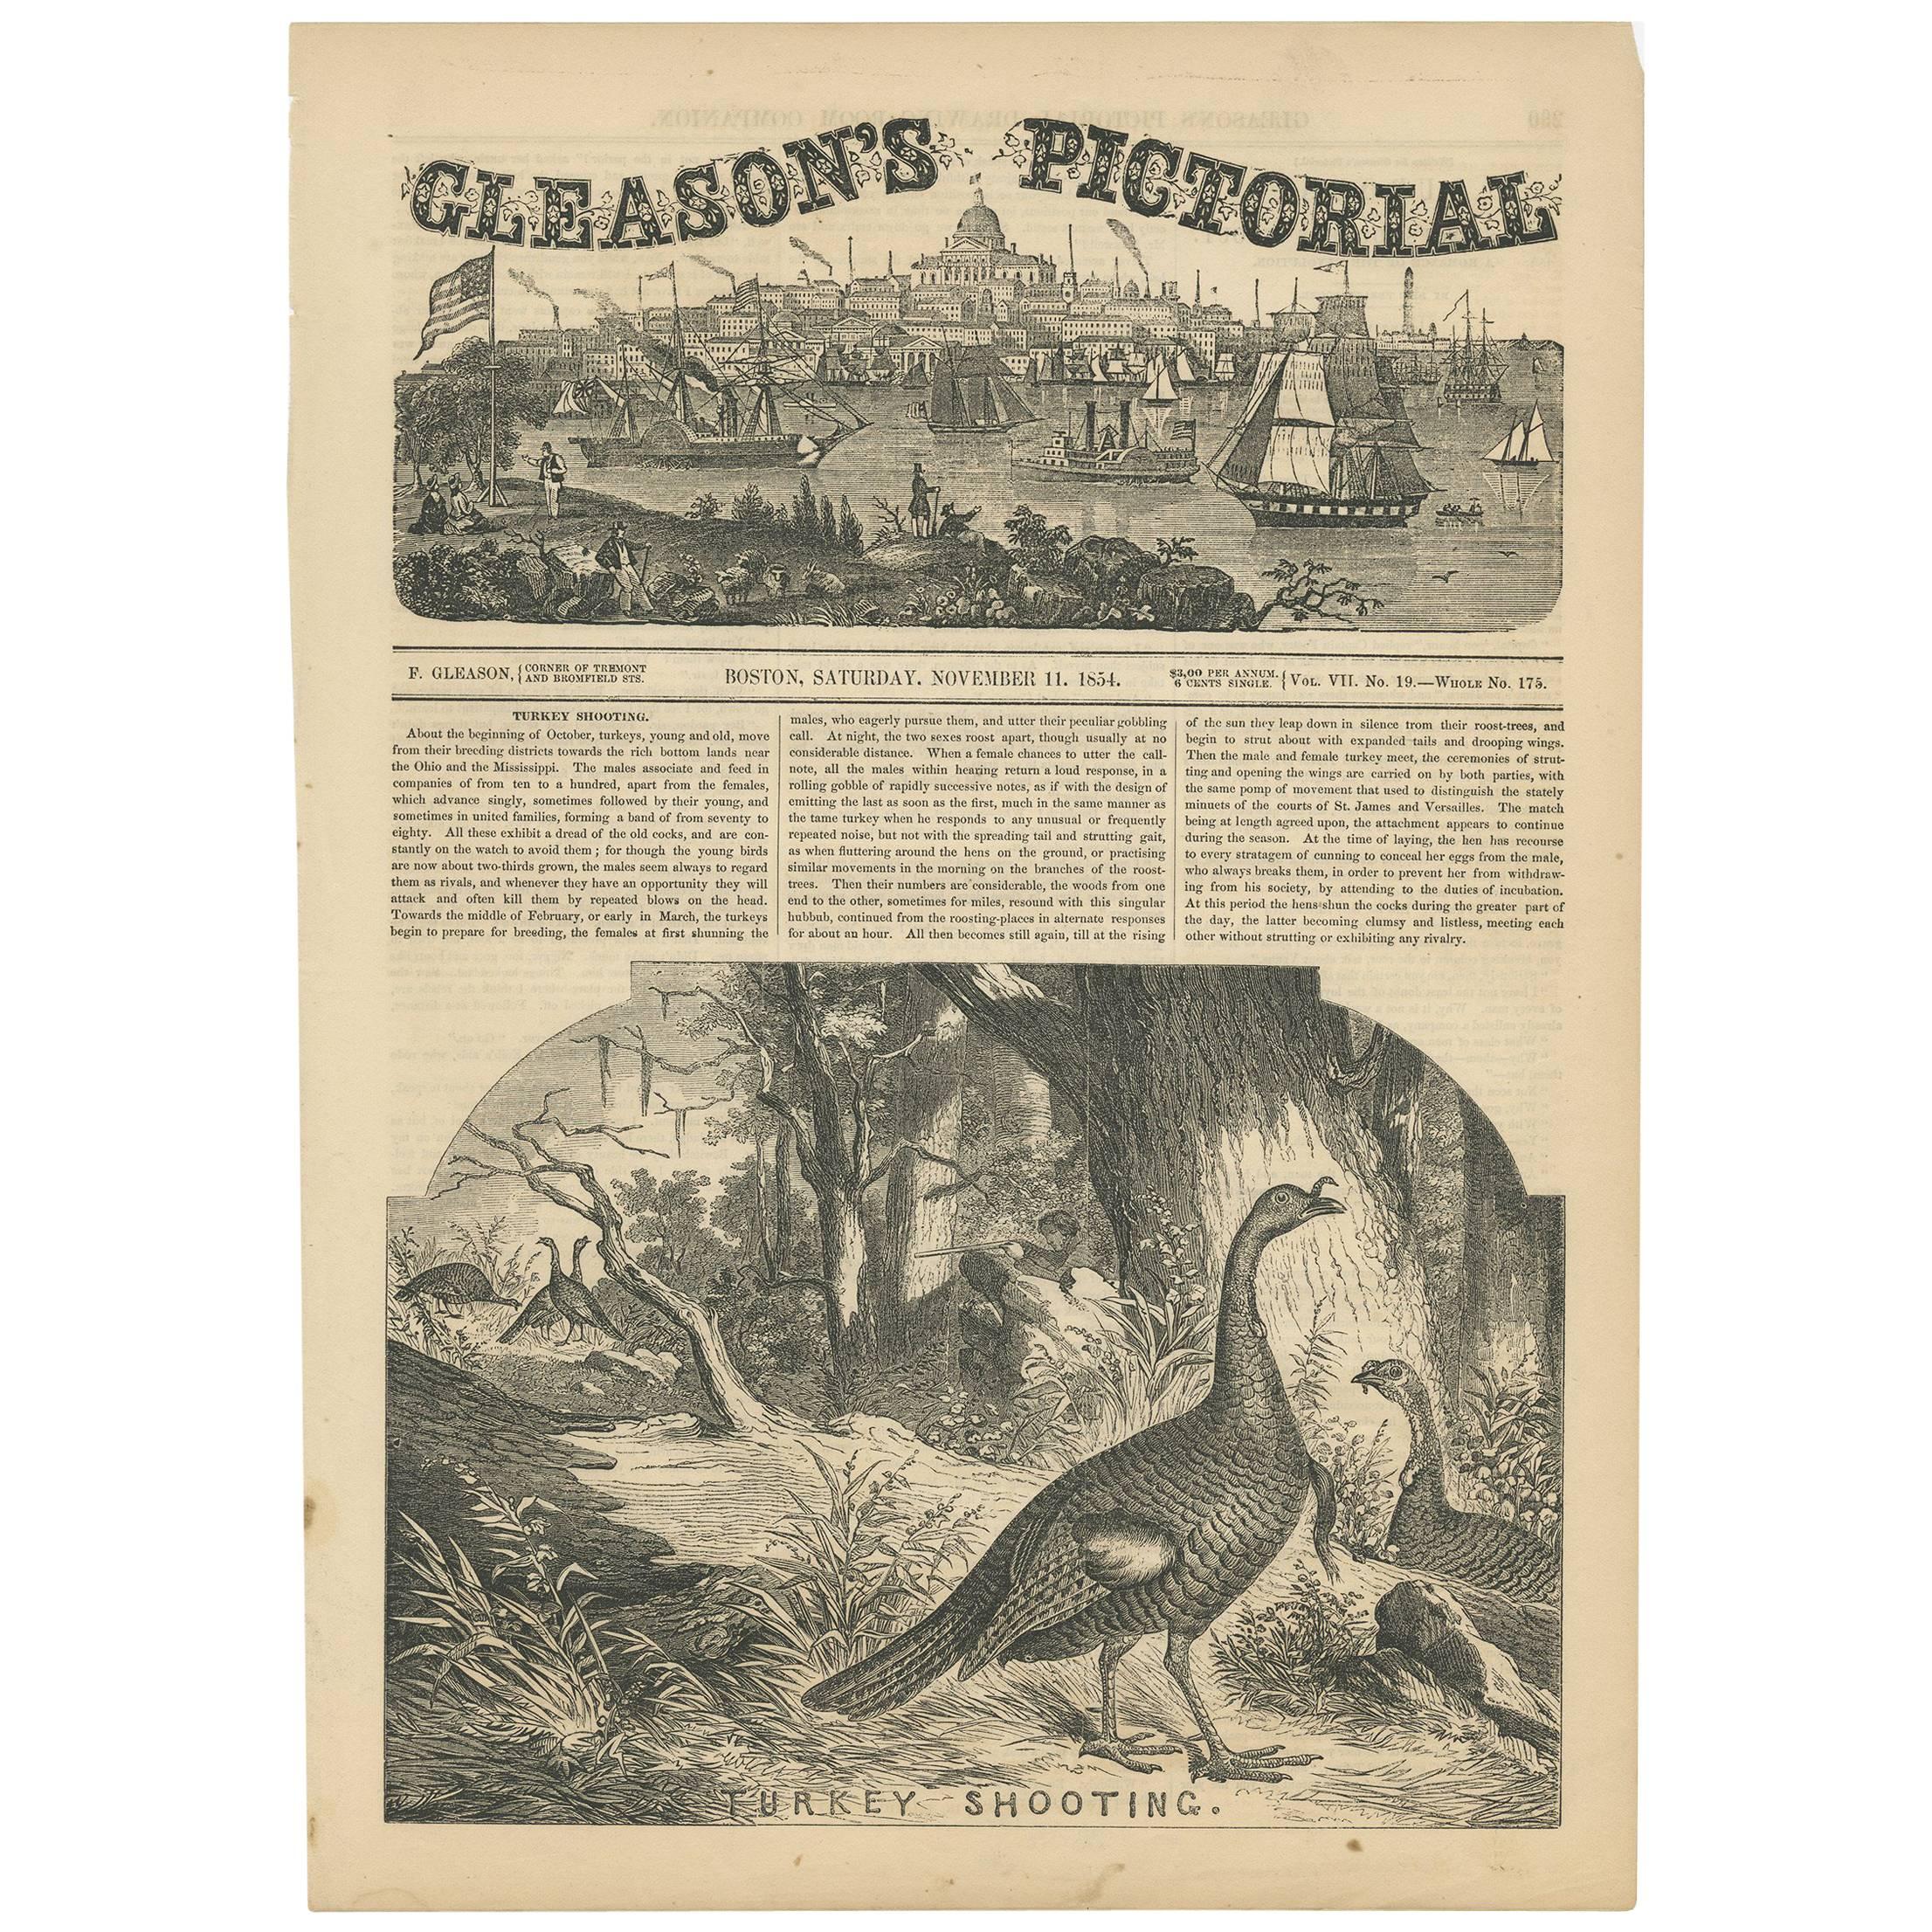 Antique Print of Turkey Shooting by Gleason's Pictorial, 1854